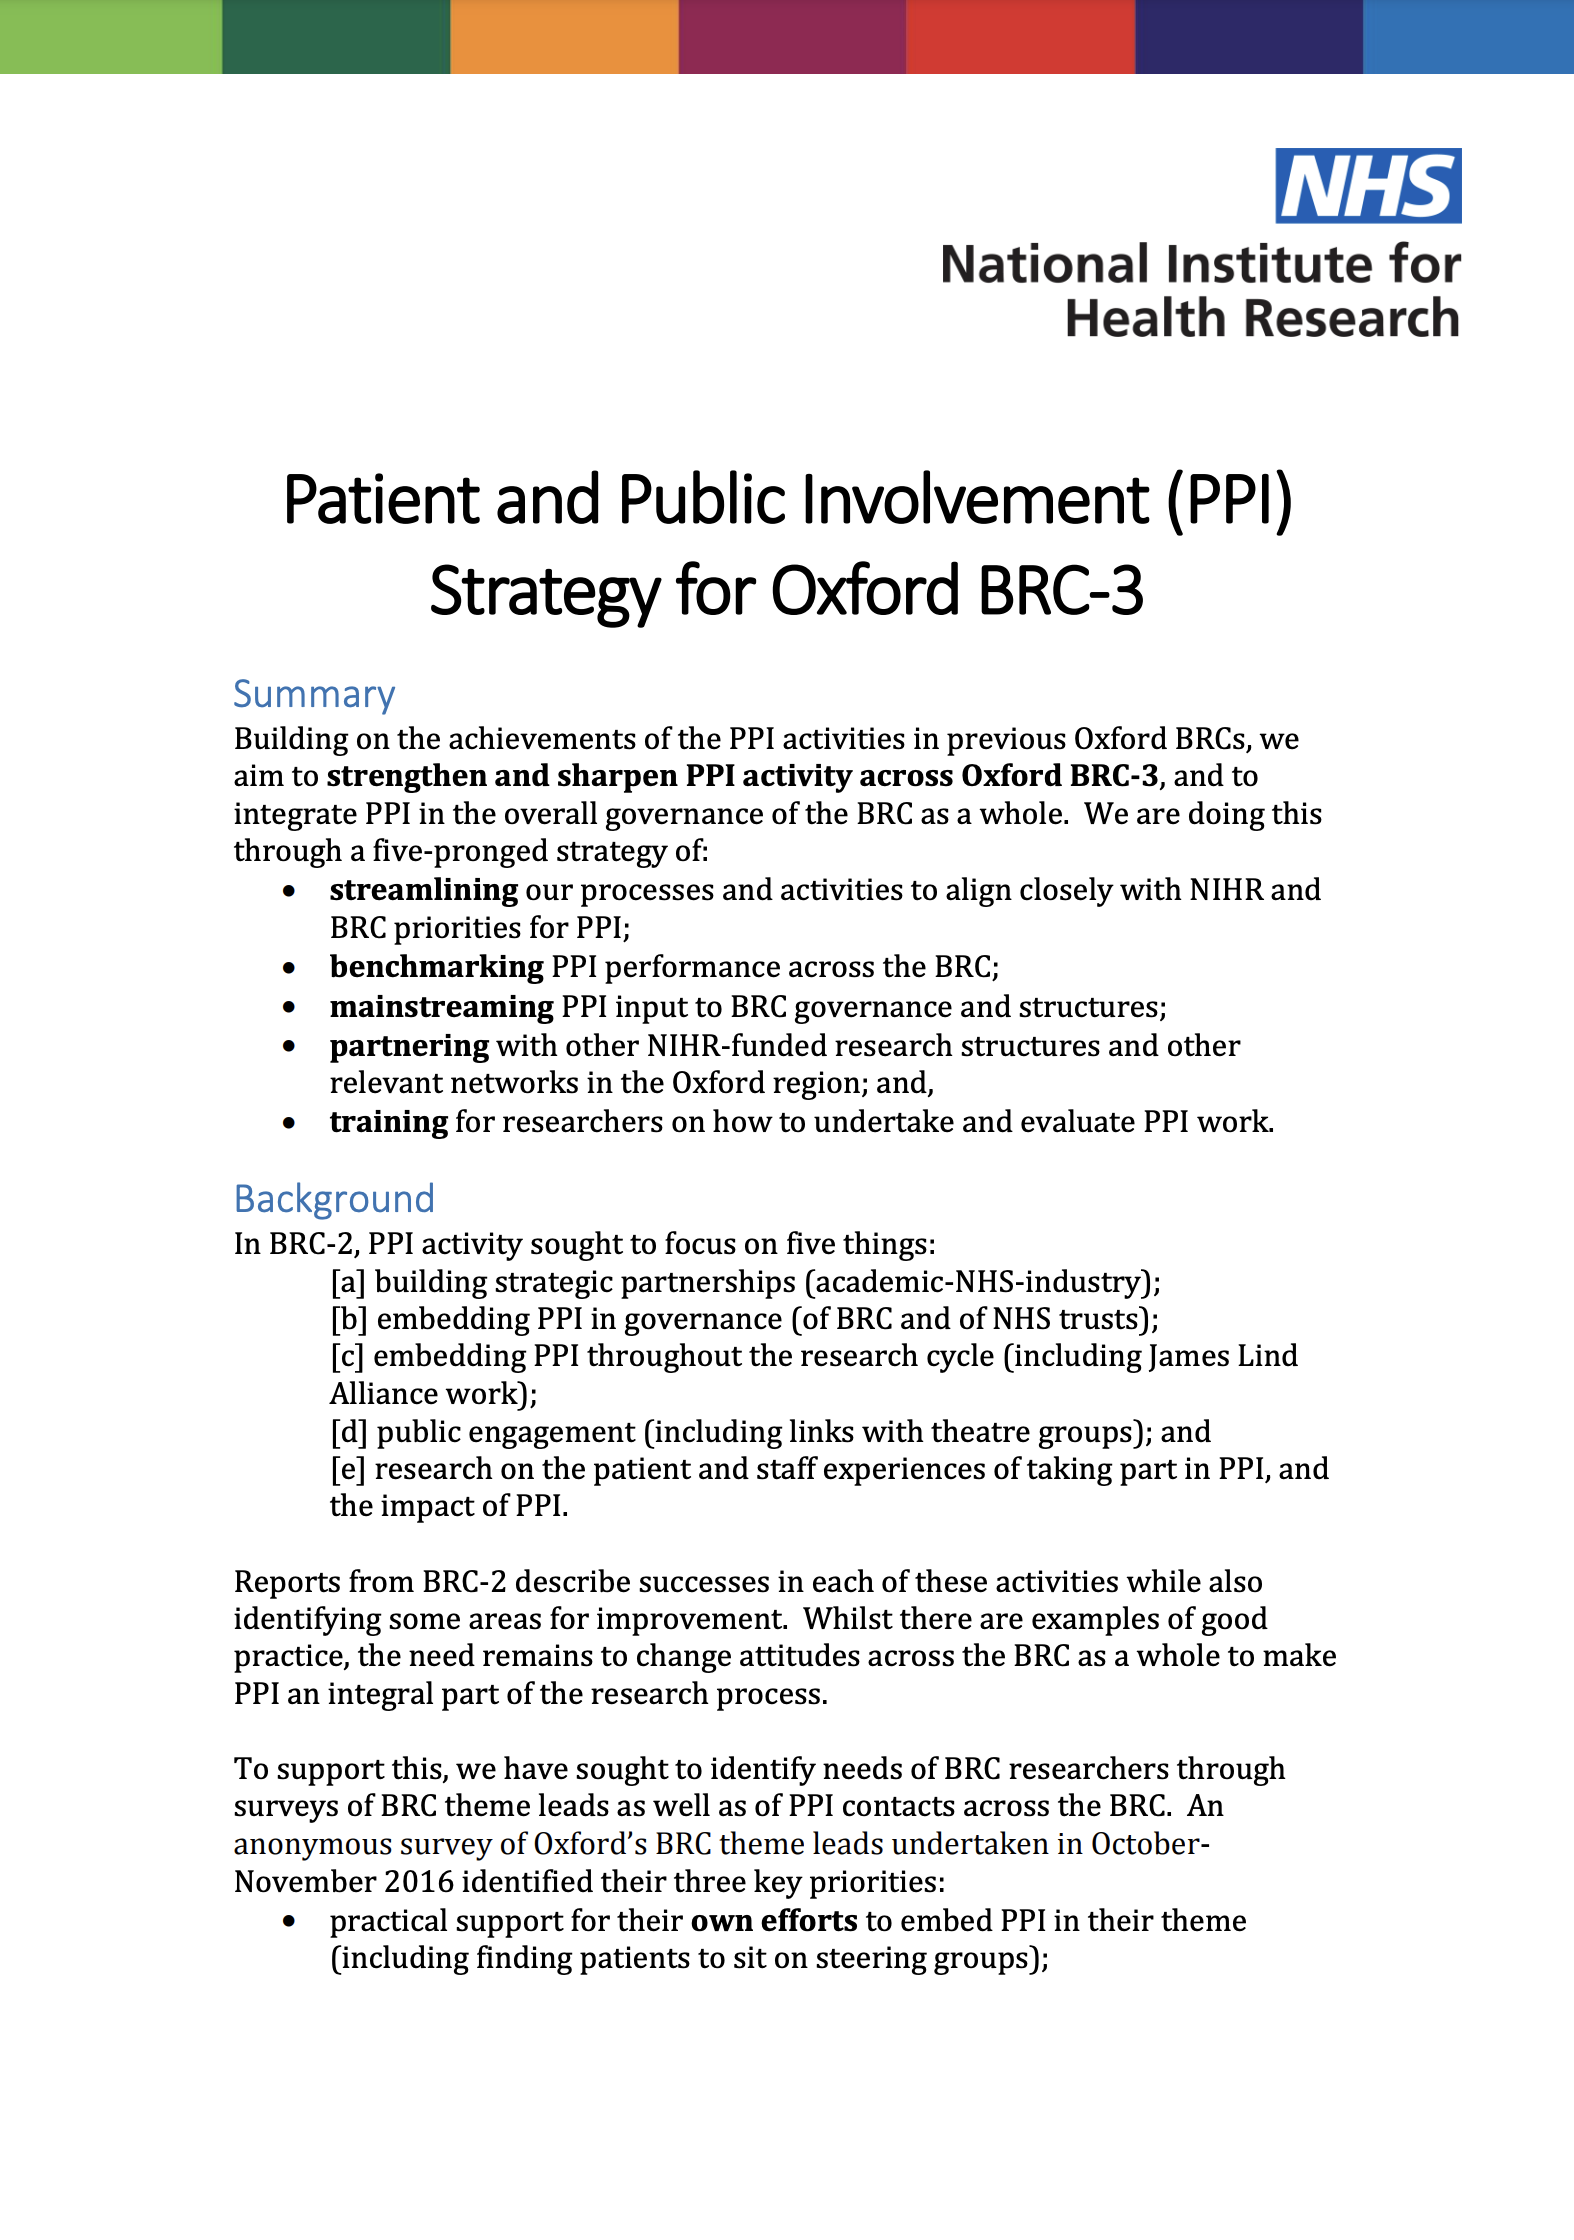 Preview of PDF link: Previous PPI strategy document /